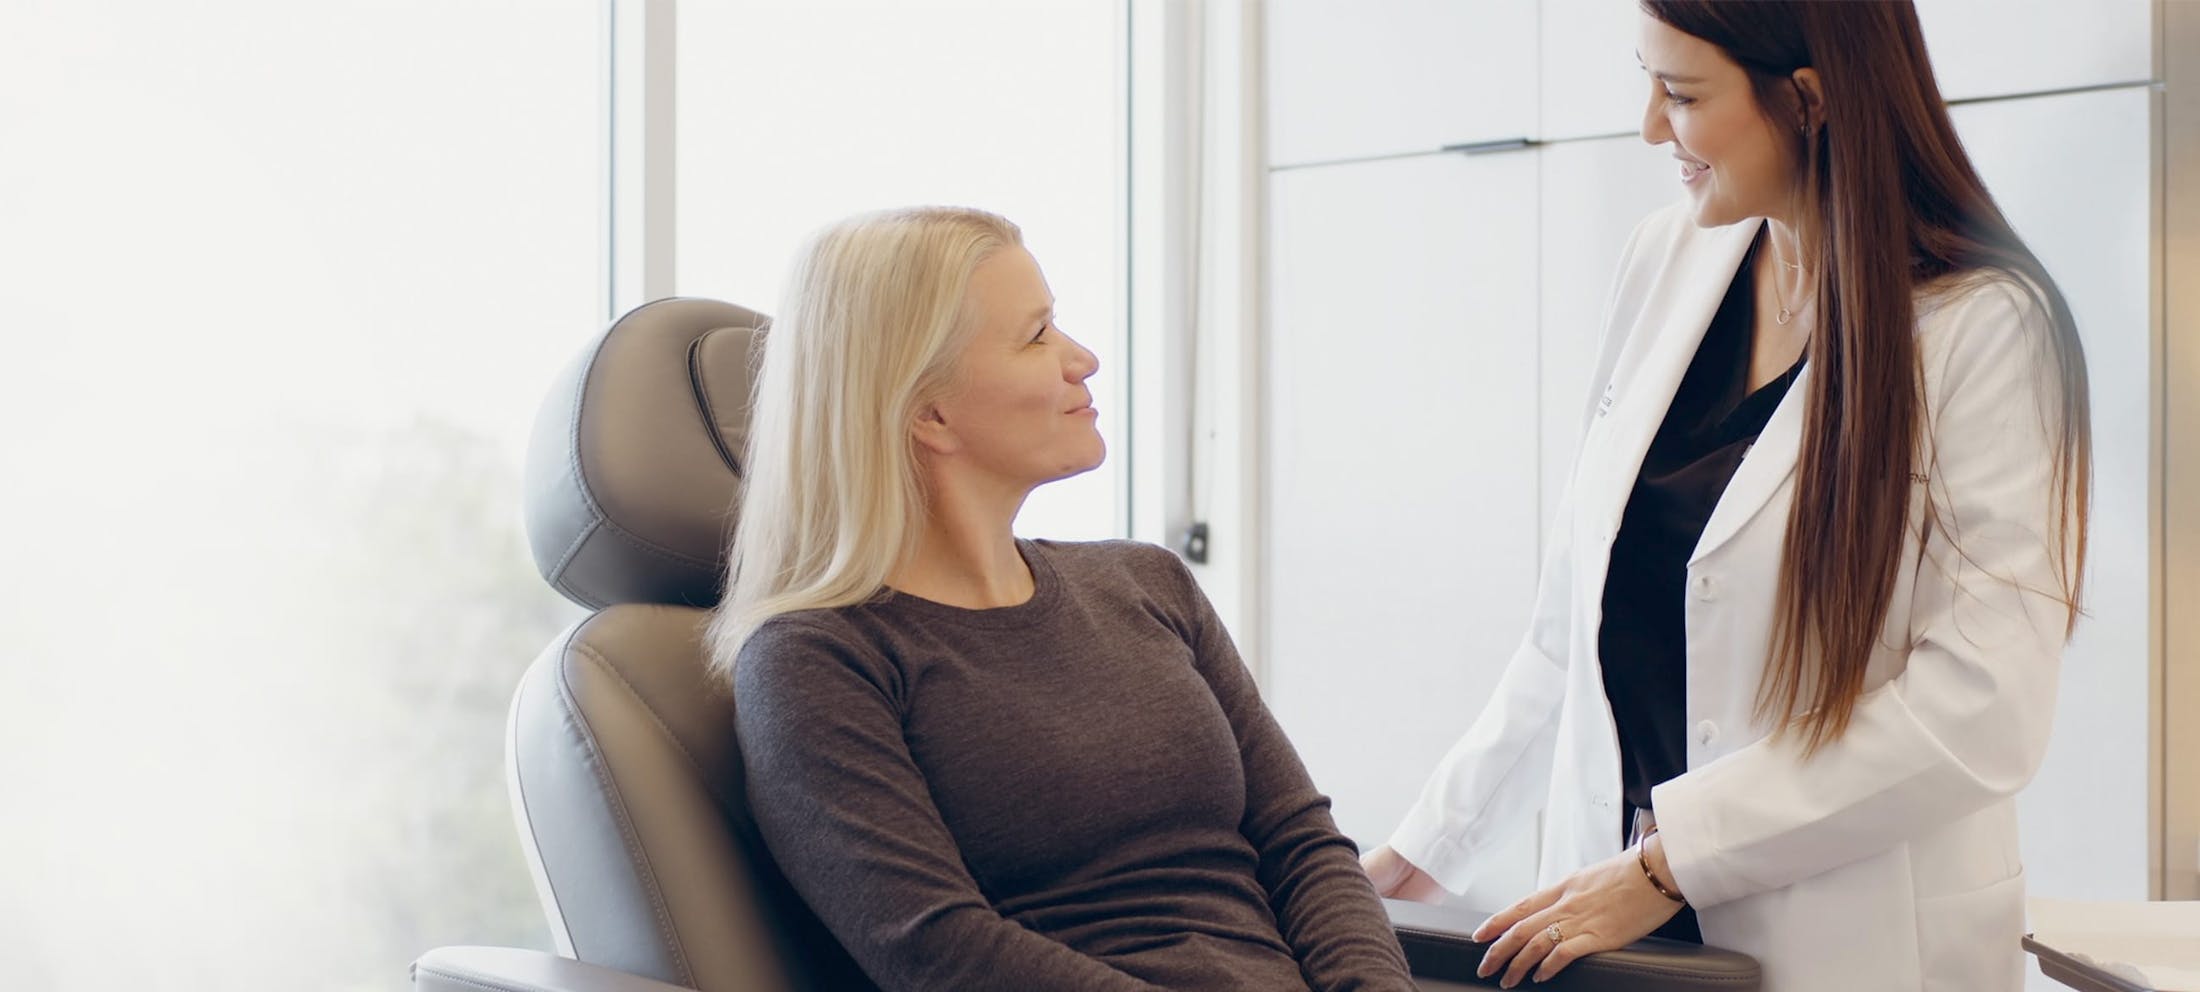 Female patient talking to a medical provider